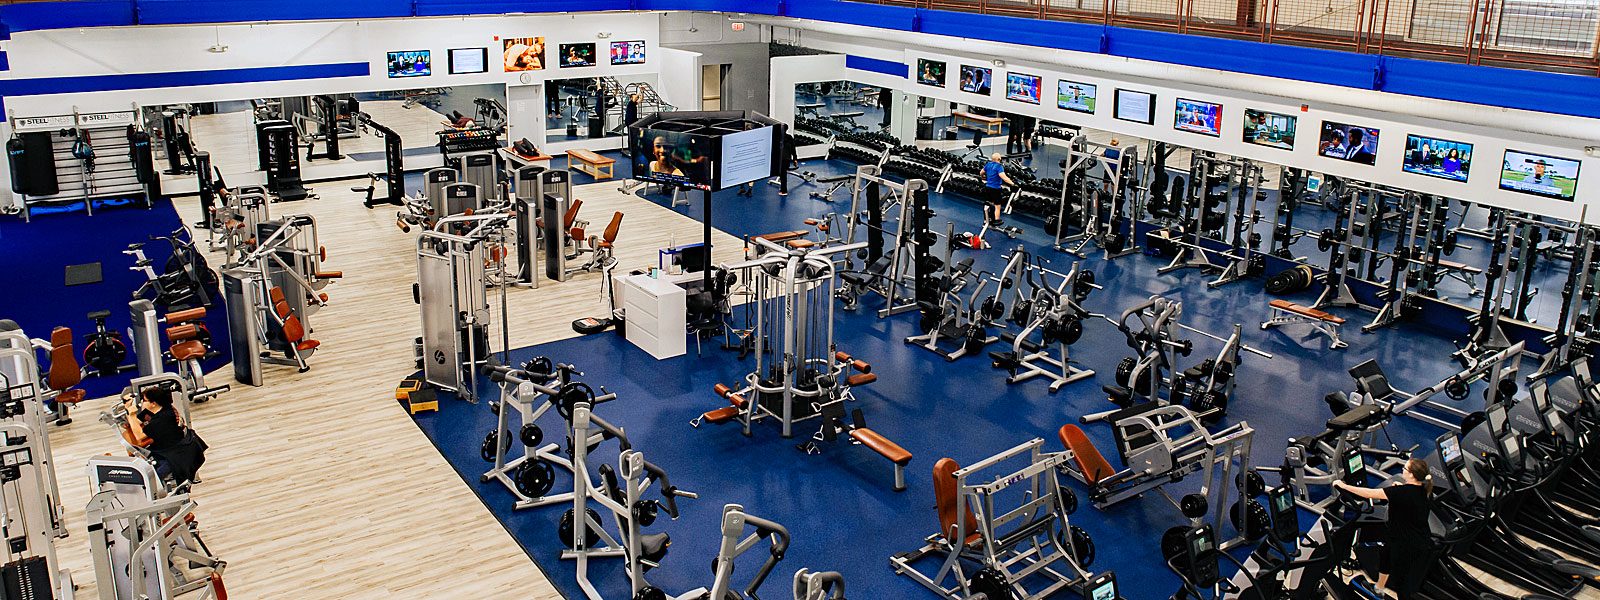 View of the fitness floor and exercise equipment at Steel Fitness Premier in Allentown, PA.